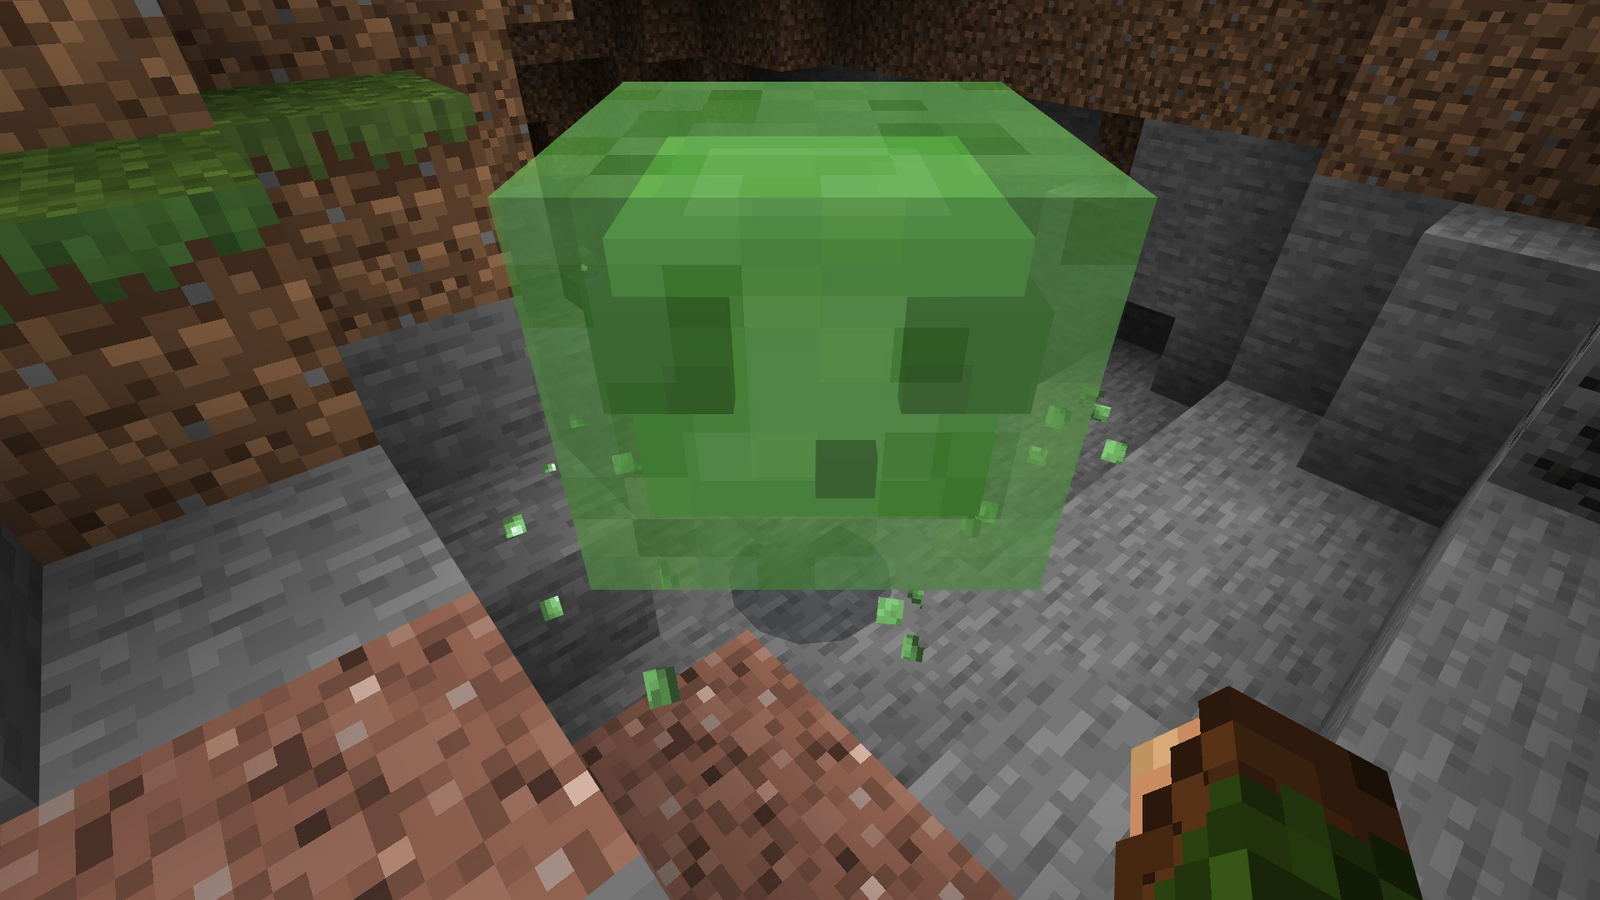 https://assetsio.gnwcdn.com/minecraft-slime-header.jpg?width=1600&height=900&fit=crop&quality=100&format=png&enable=upscale&auto=webp